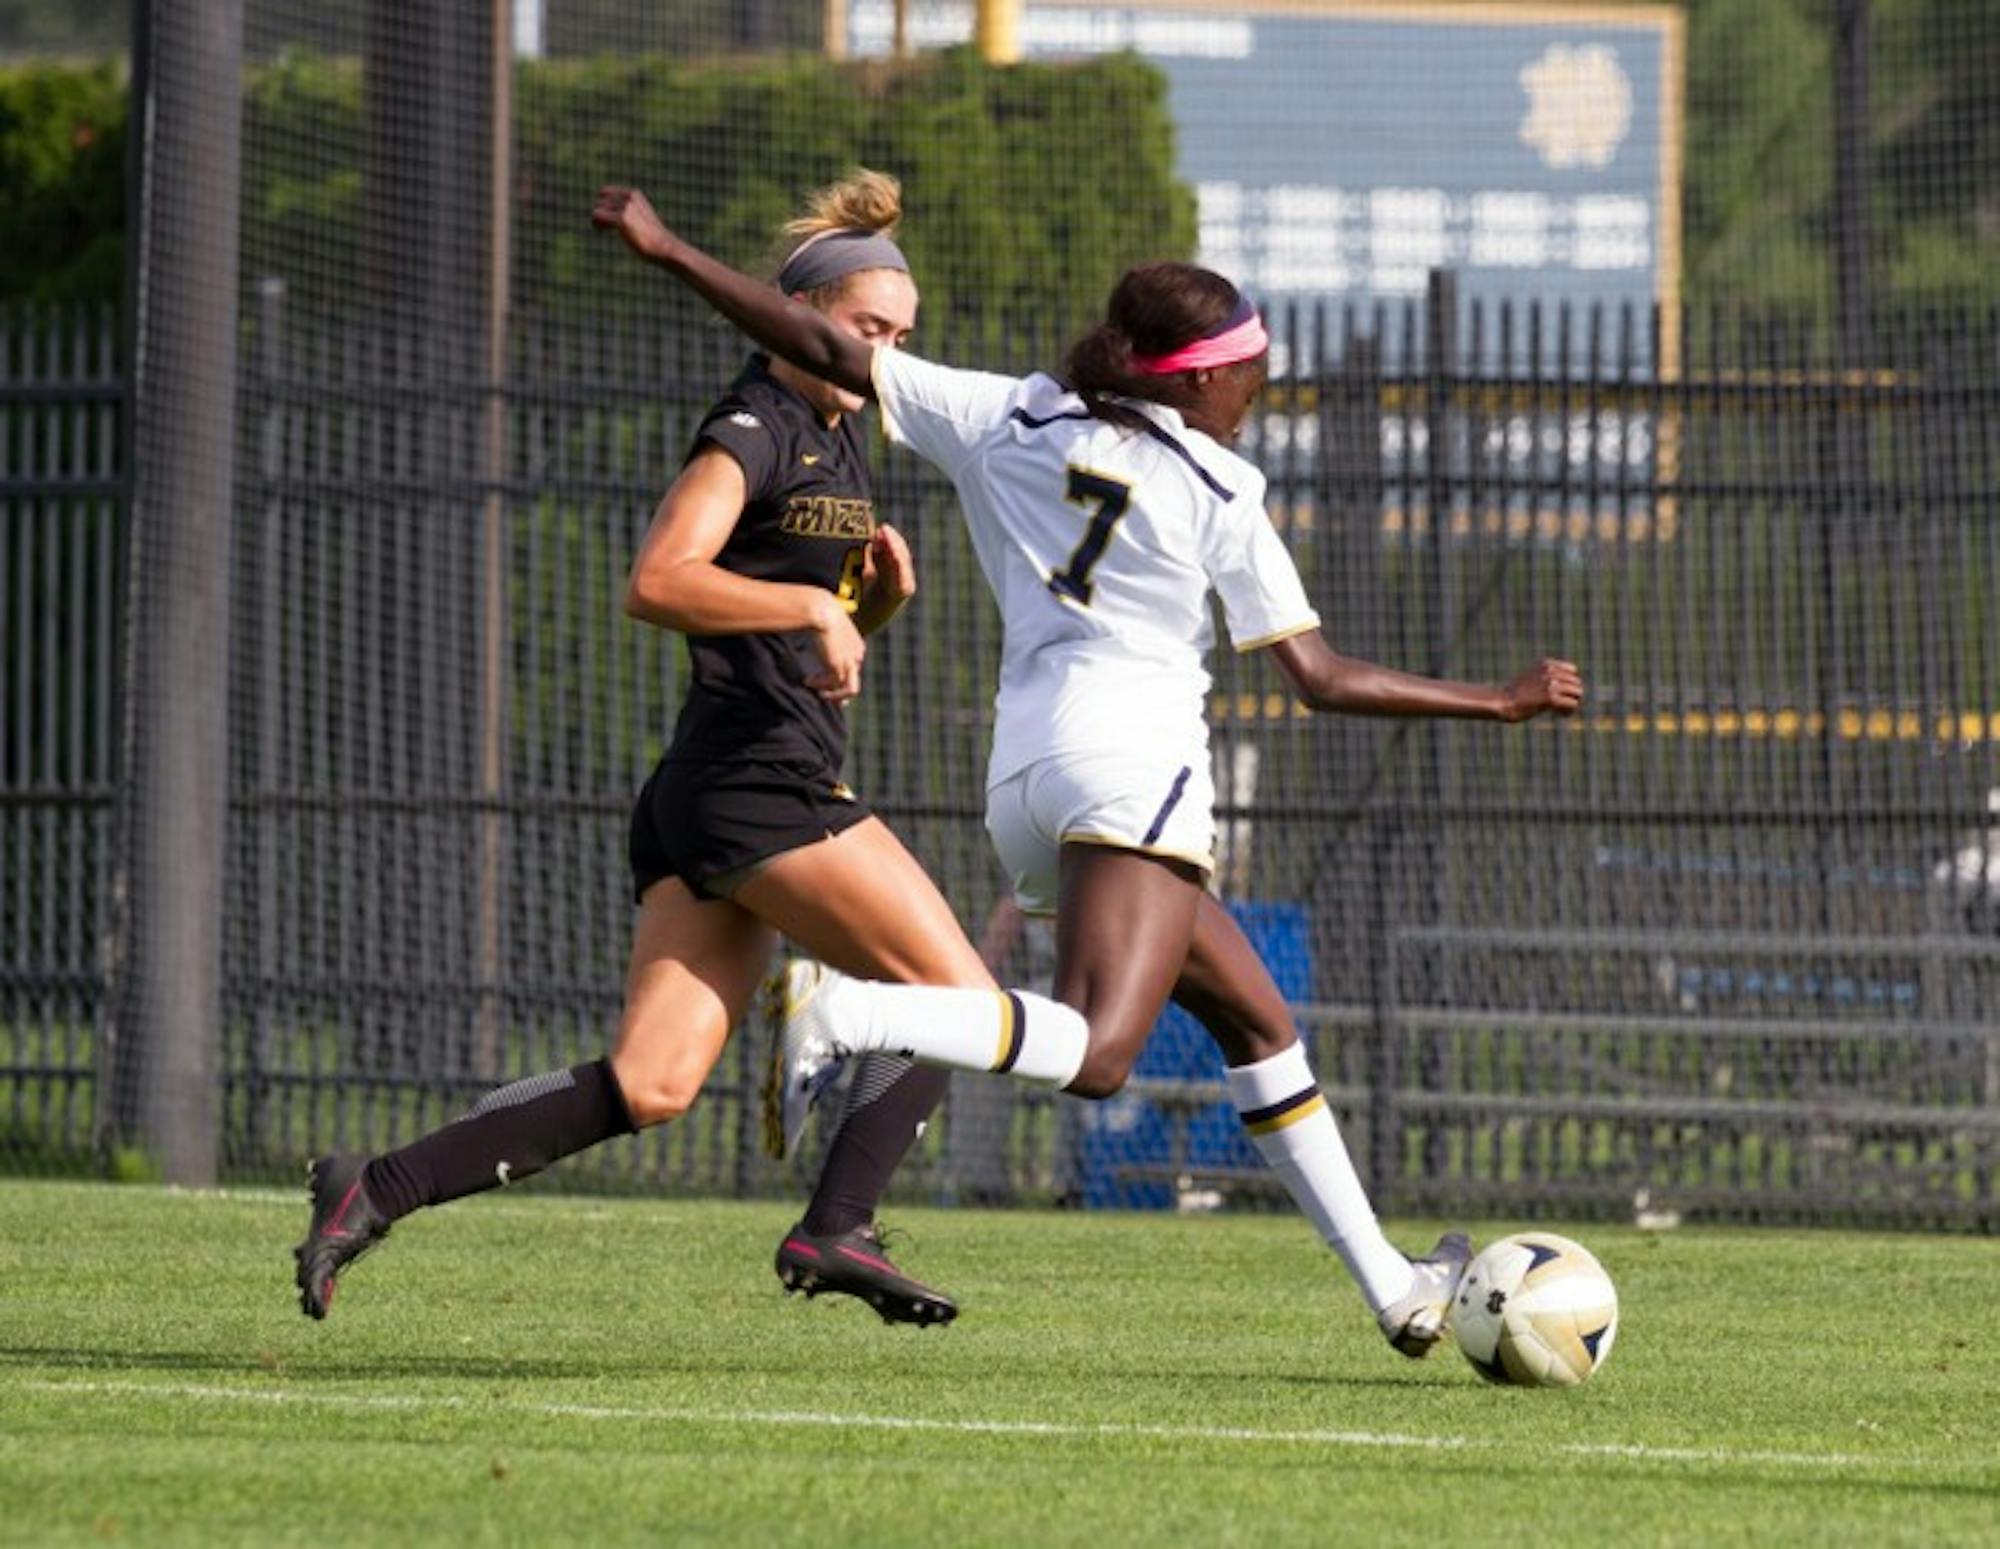 Junior forward Karin Muya dribbles around a defender in Notre Dame's 1-0 victory over Mizzouri on Sept. 4.